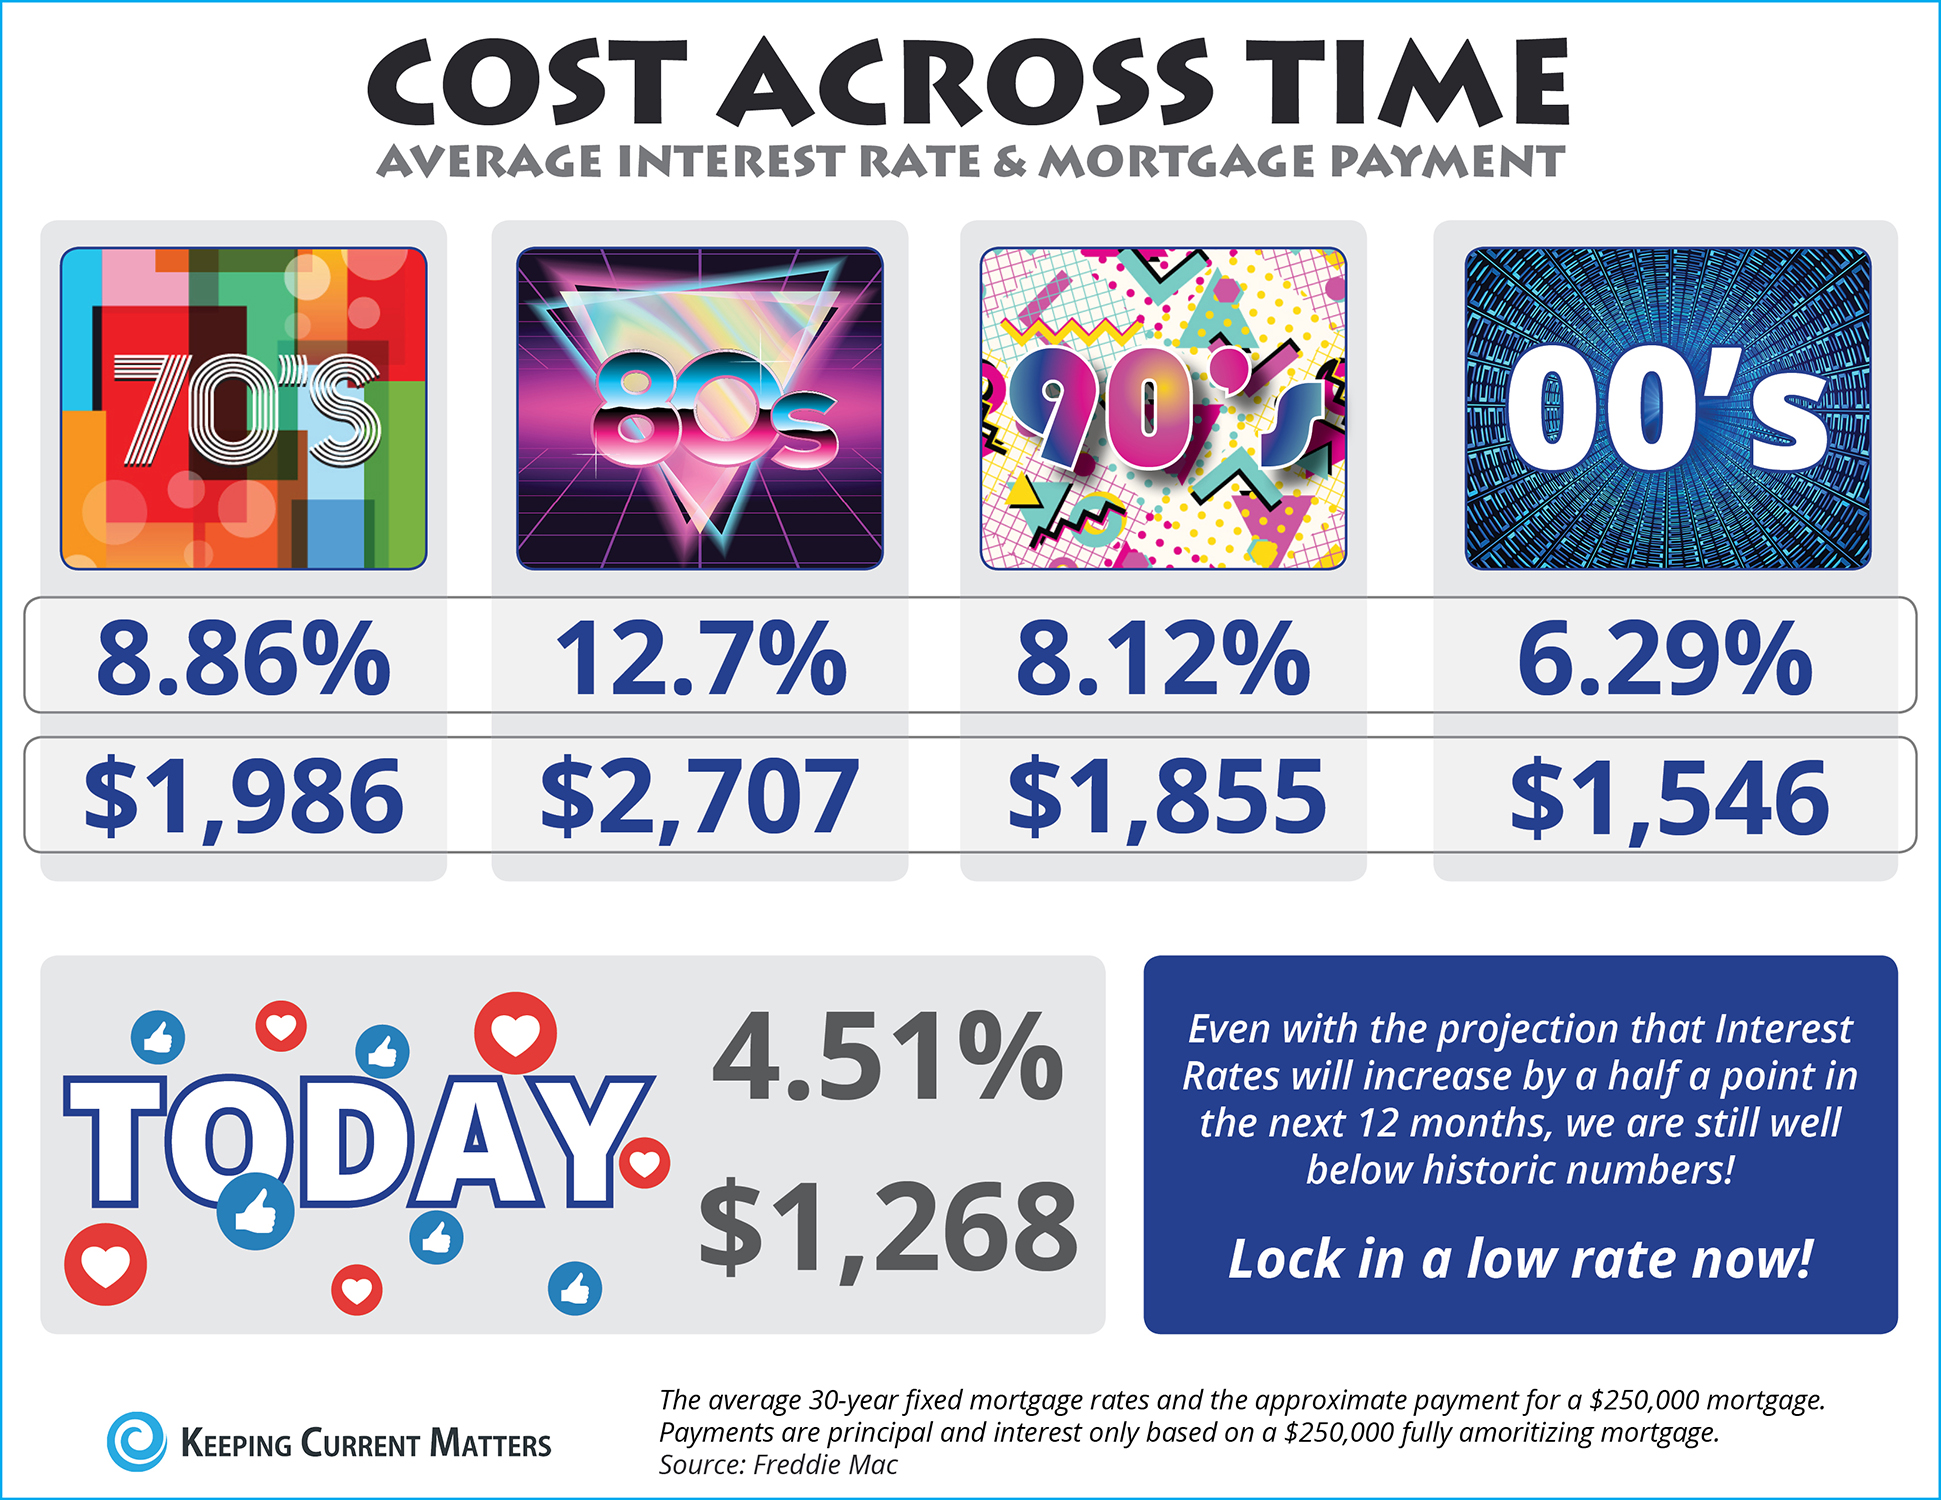 Cost Across Time